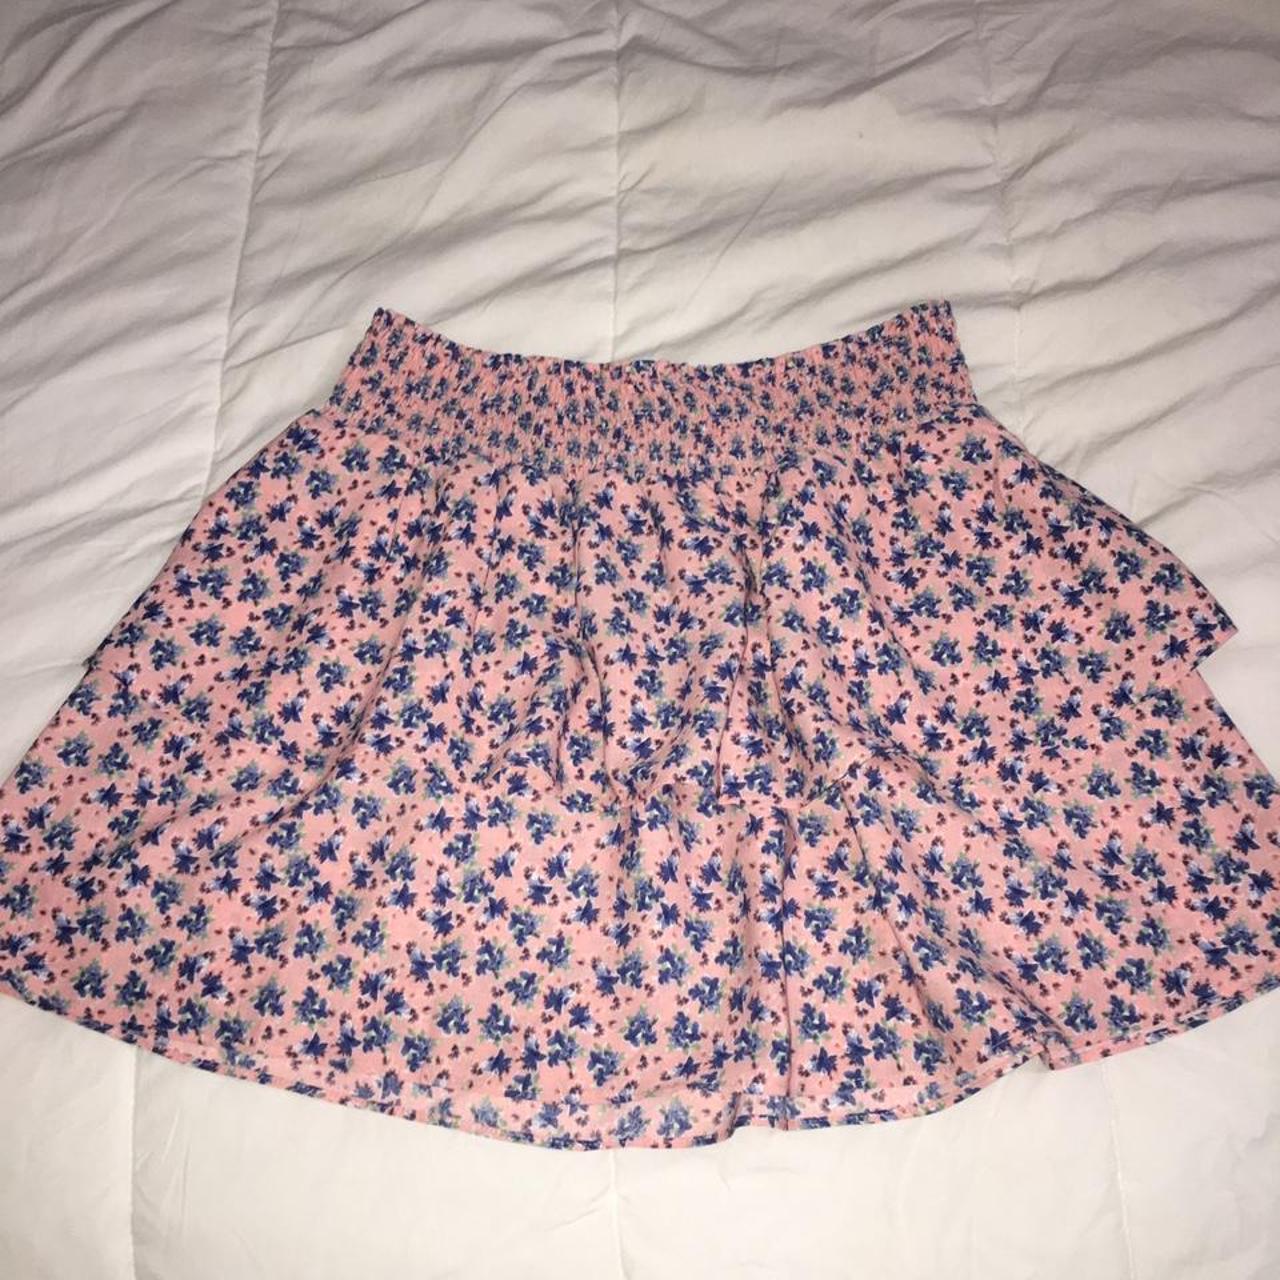 Product Image 1 - Kids size 14 pink skirt!!